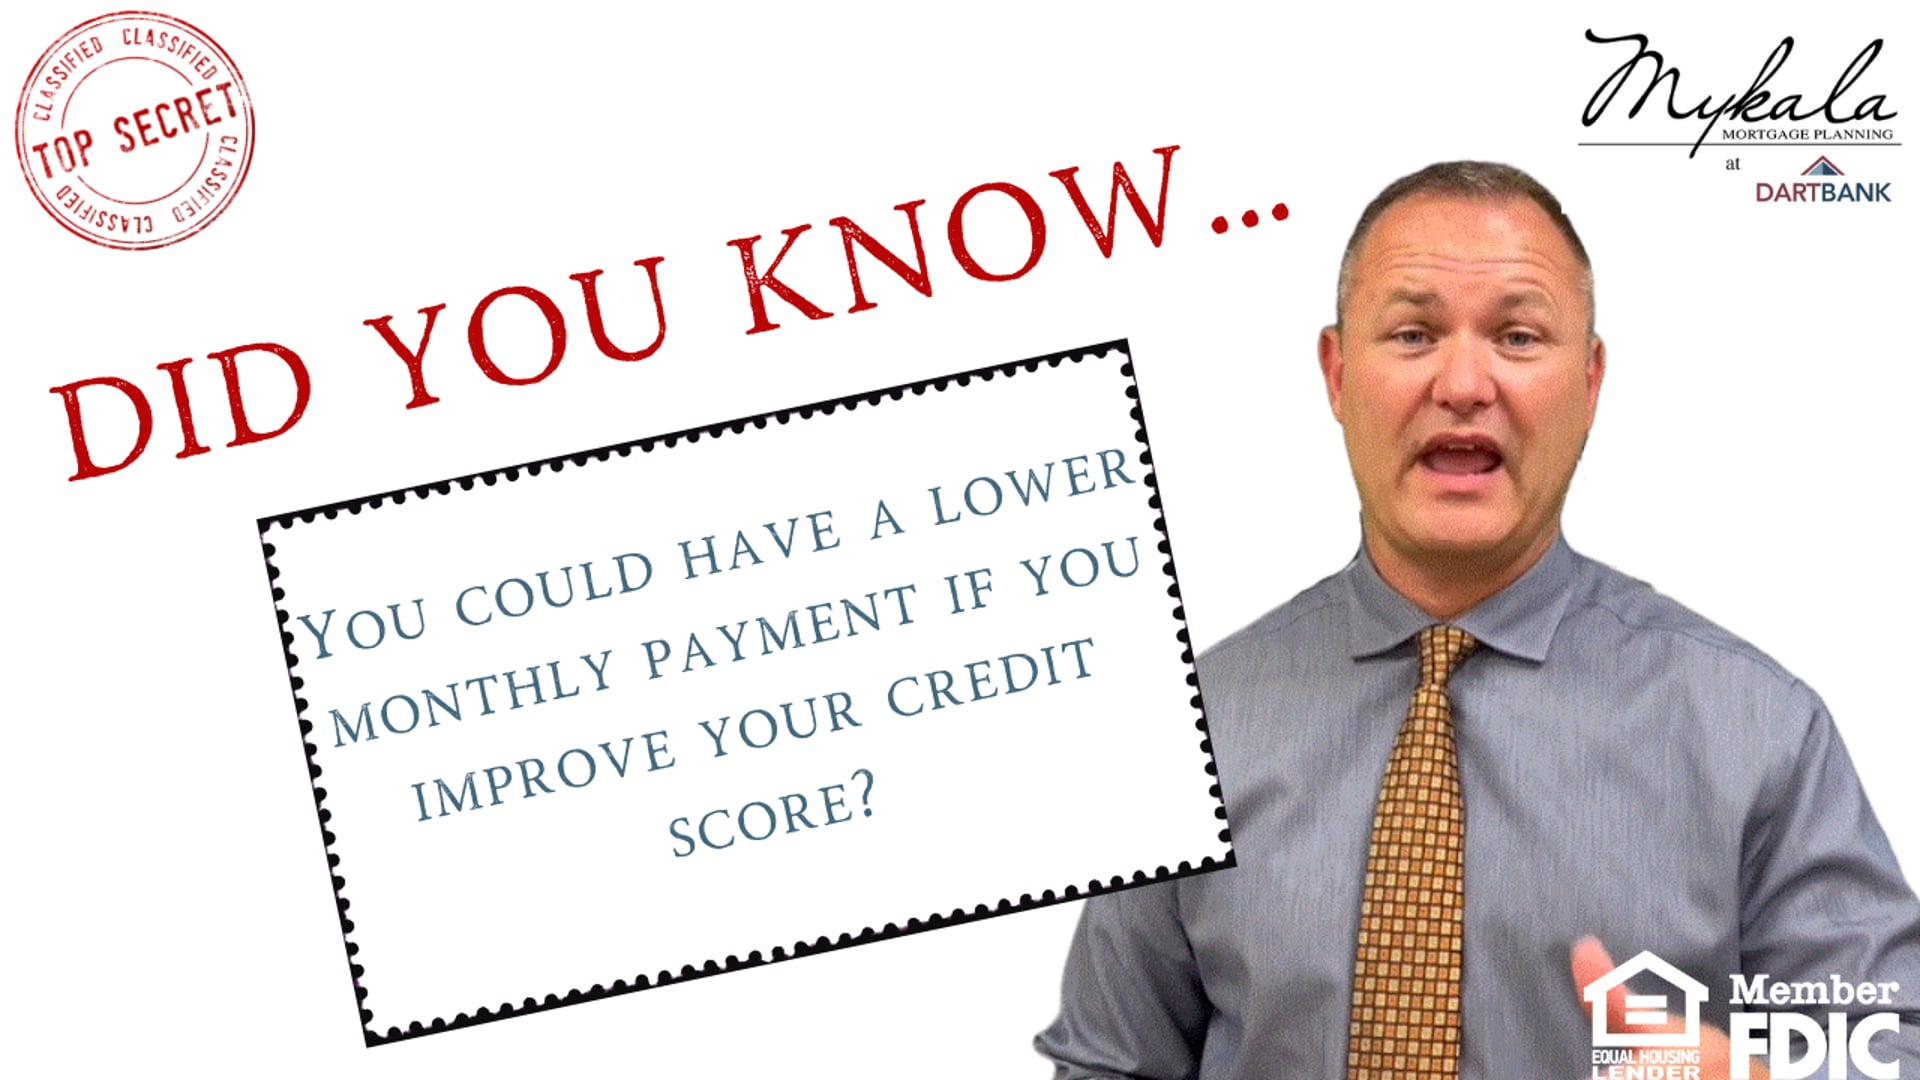 You Could Have A Lower Monthly Payment If You Improve Your Credit Score